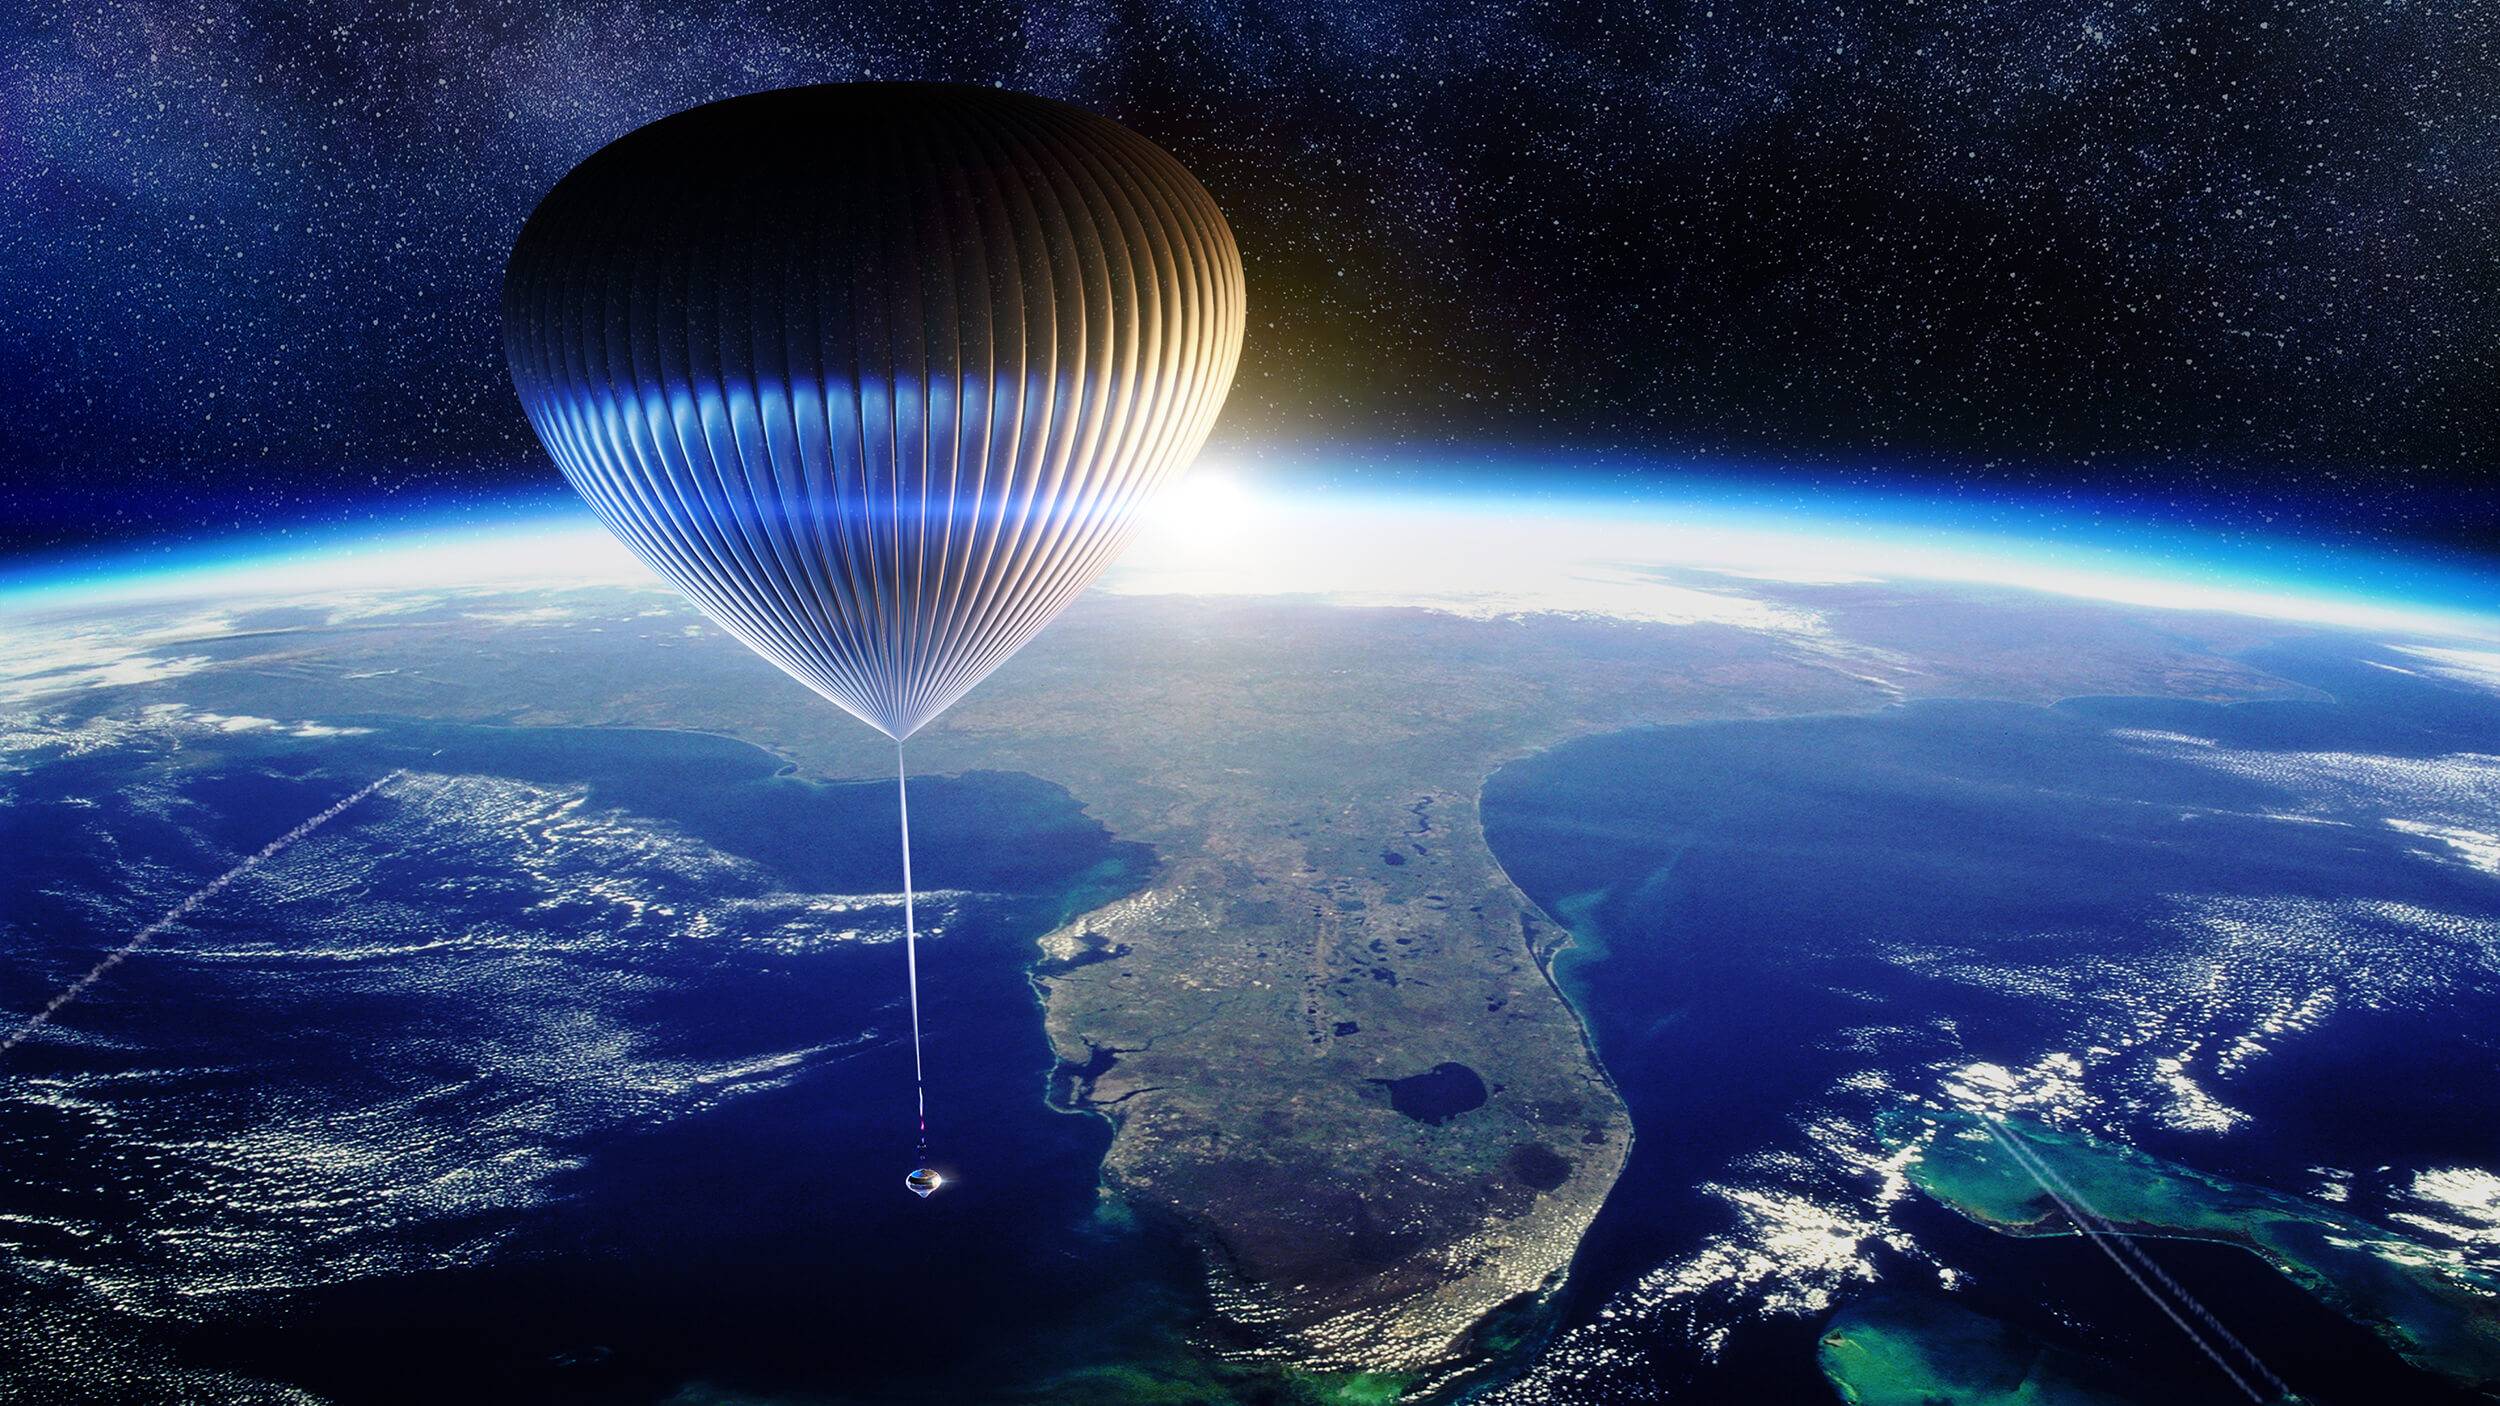 A space capsule hovering in space above the Earth's atmosphere, lifted by a large balloon